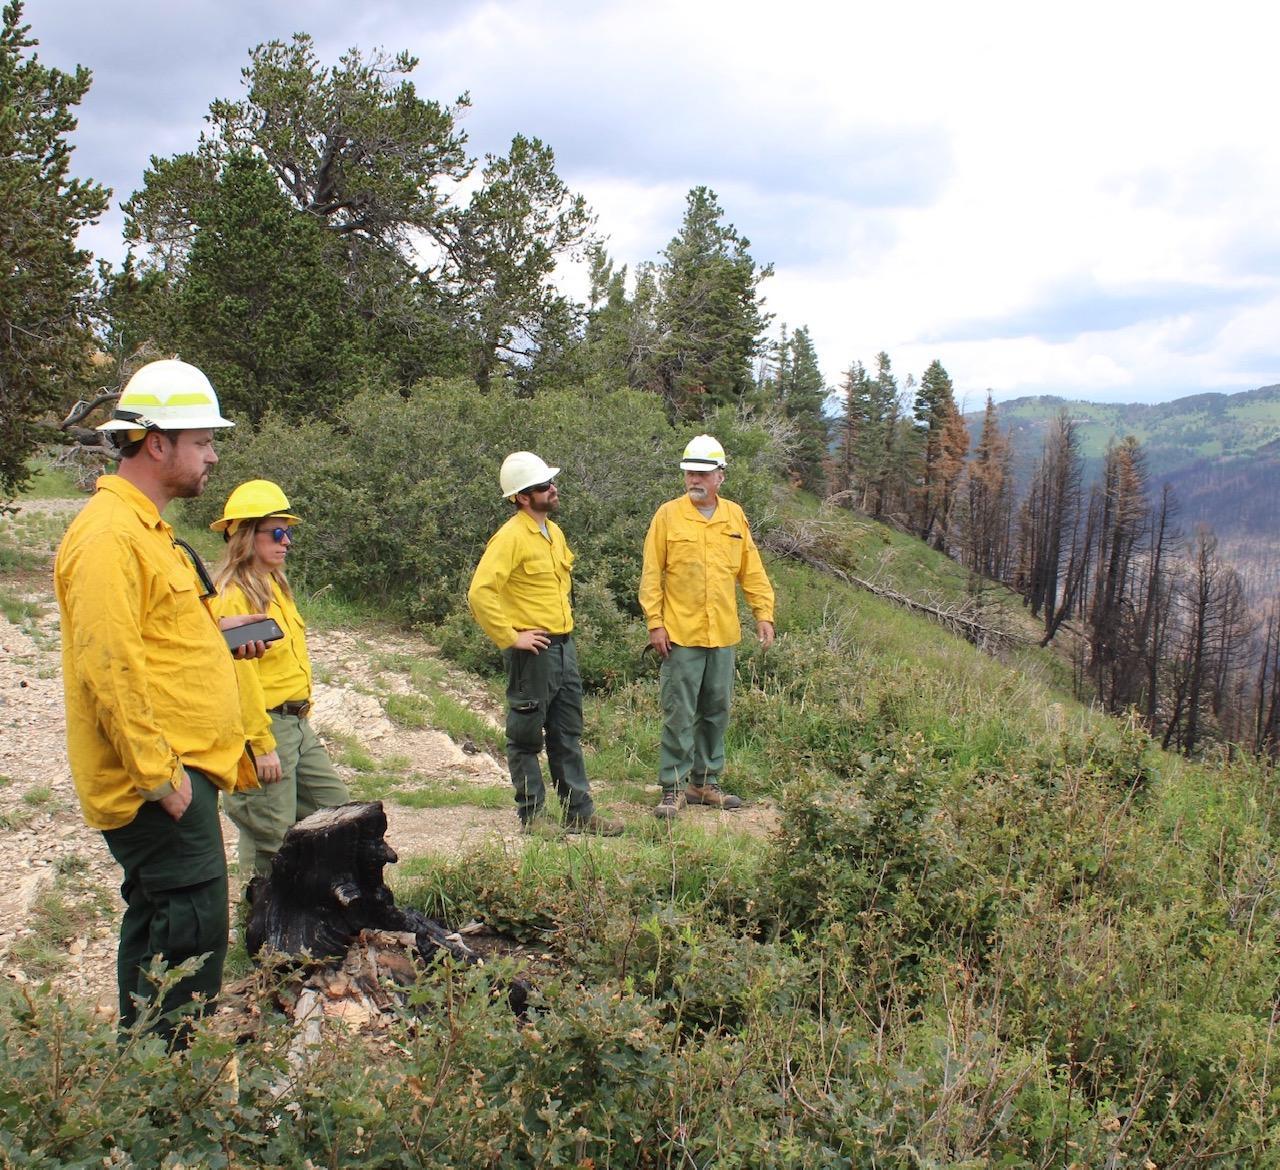 Four people in yellow shirts and helmets looking out over mountains.